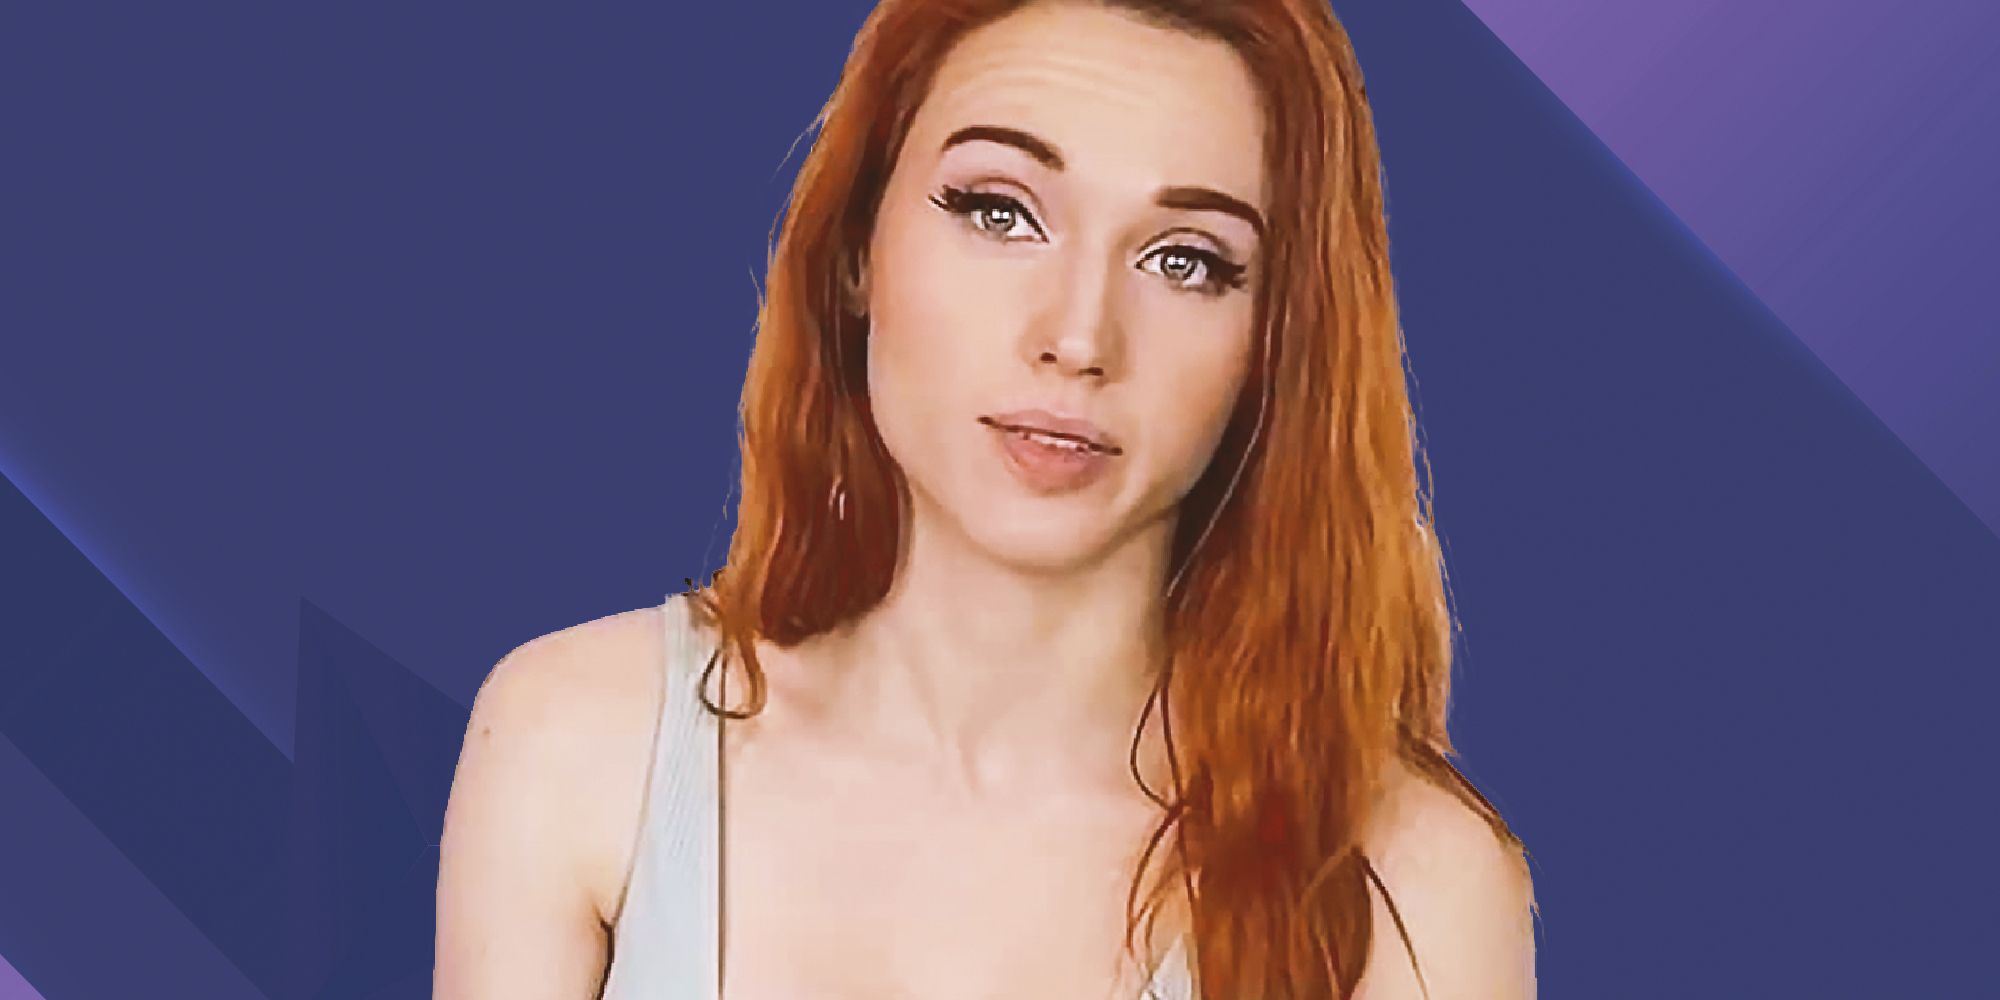 Amouranth headshot against a blue background